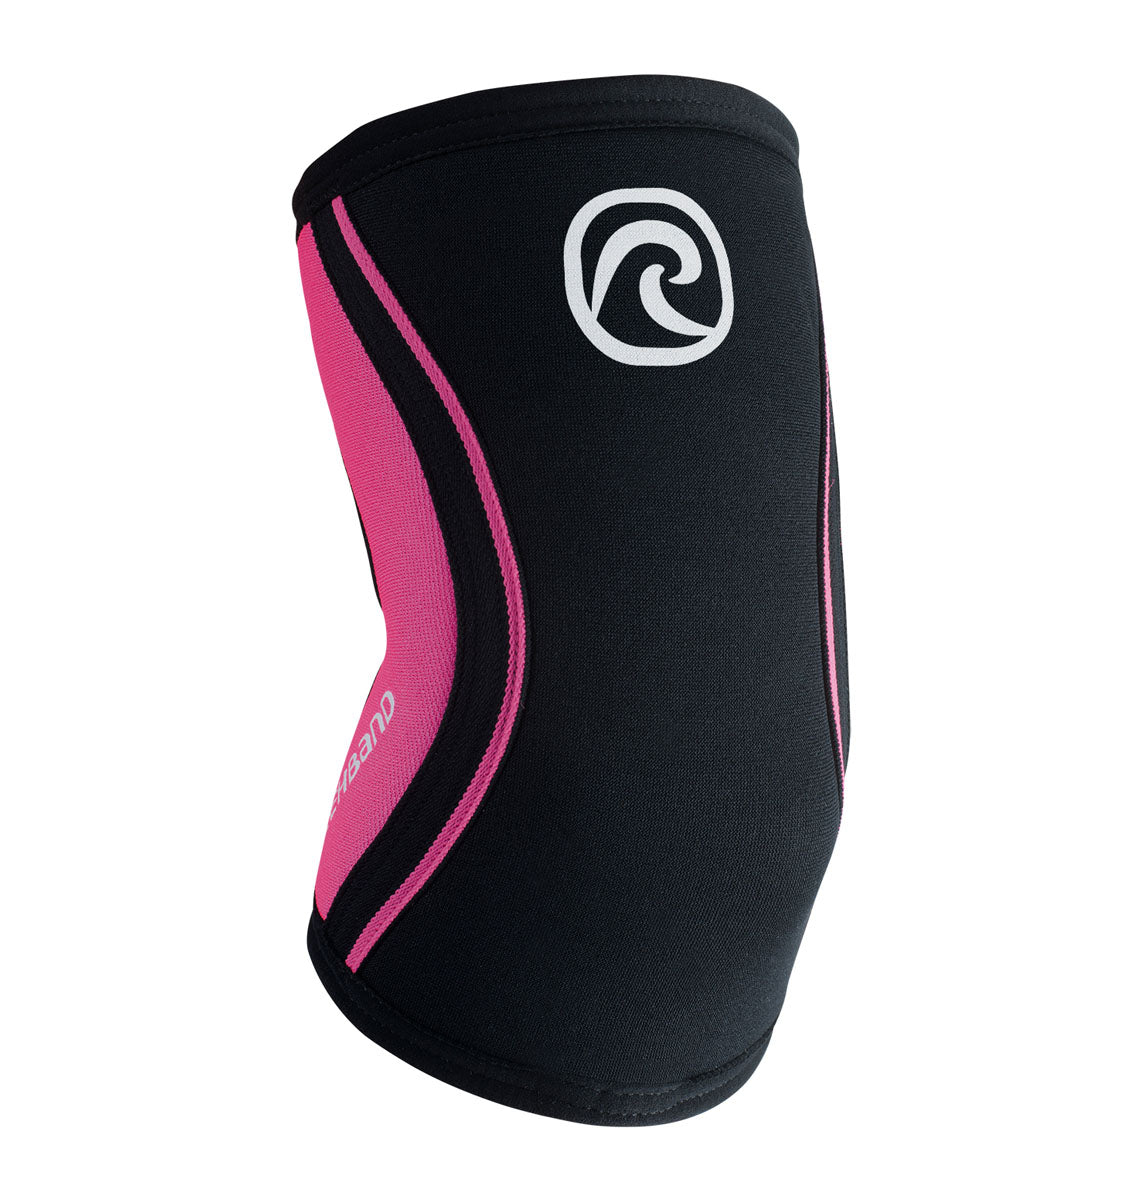 102333-020 - Rehband Rx Elbow Sleeve Black/Pink - 5mm - Front